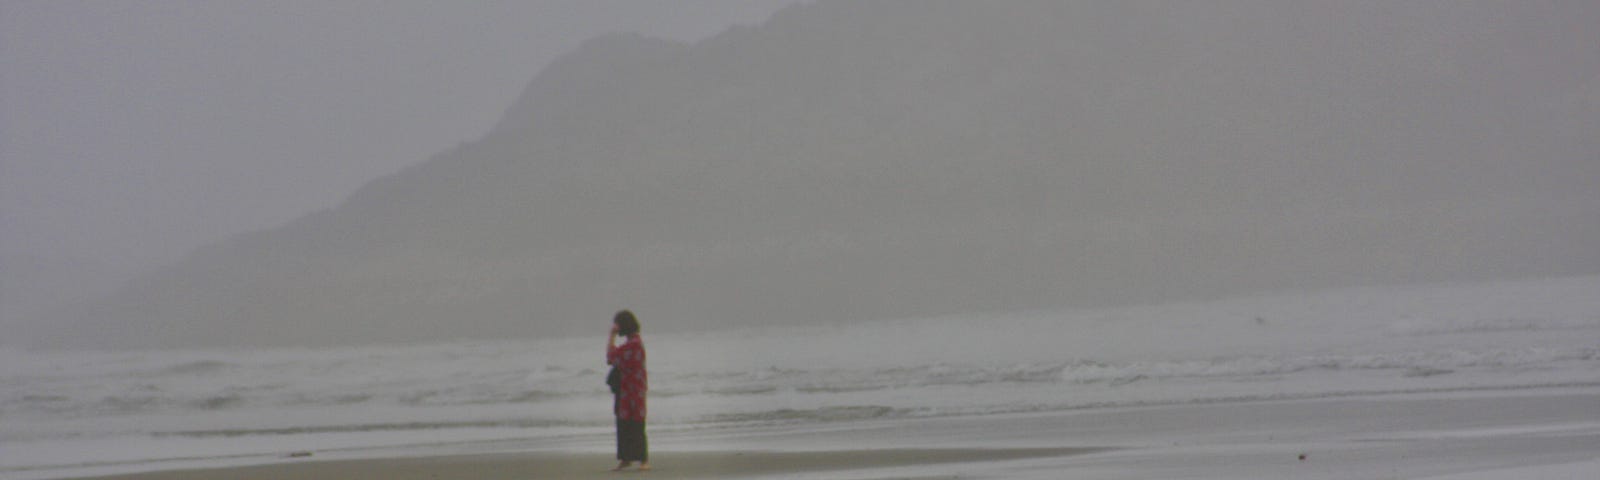 A woman stands on the shoreline. Waves wash up in front of her and wind around behind